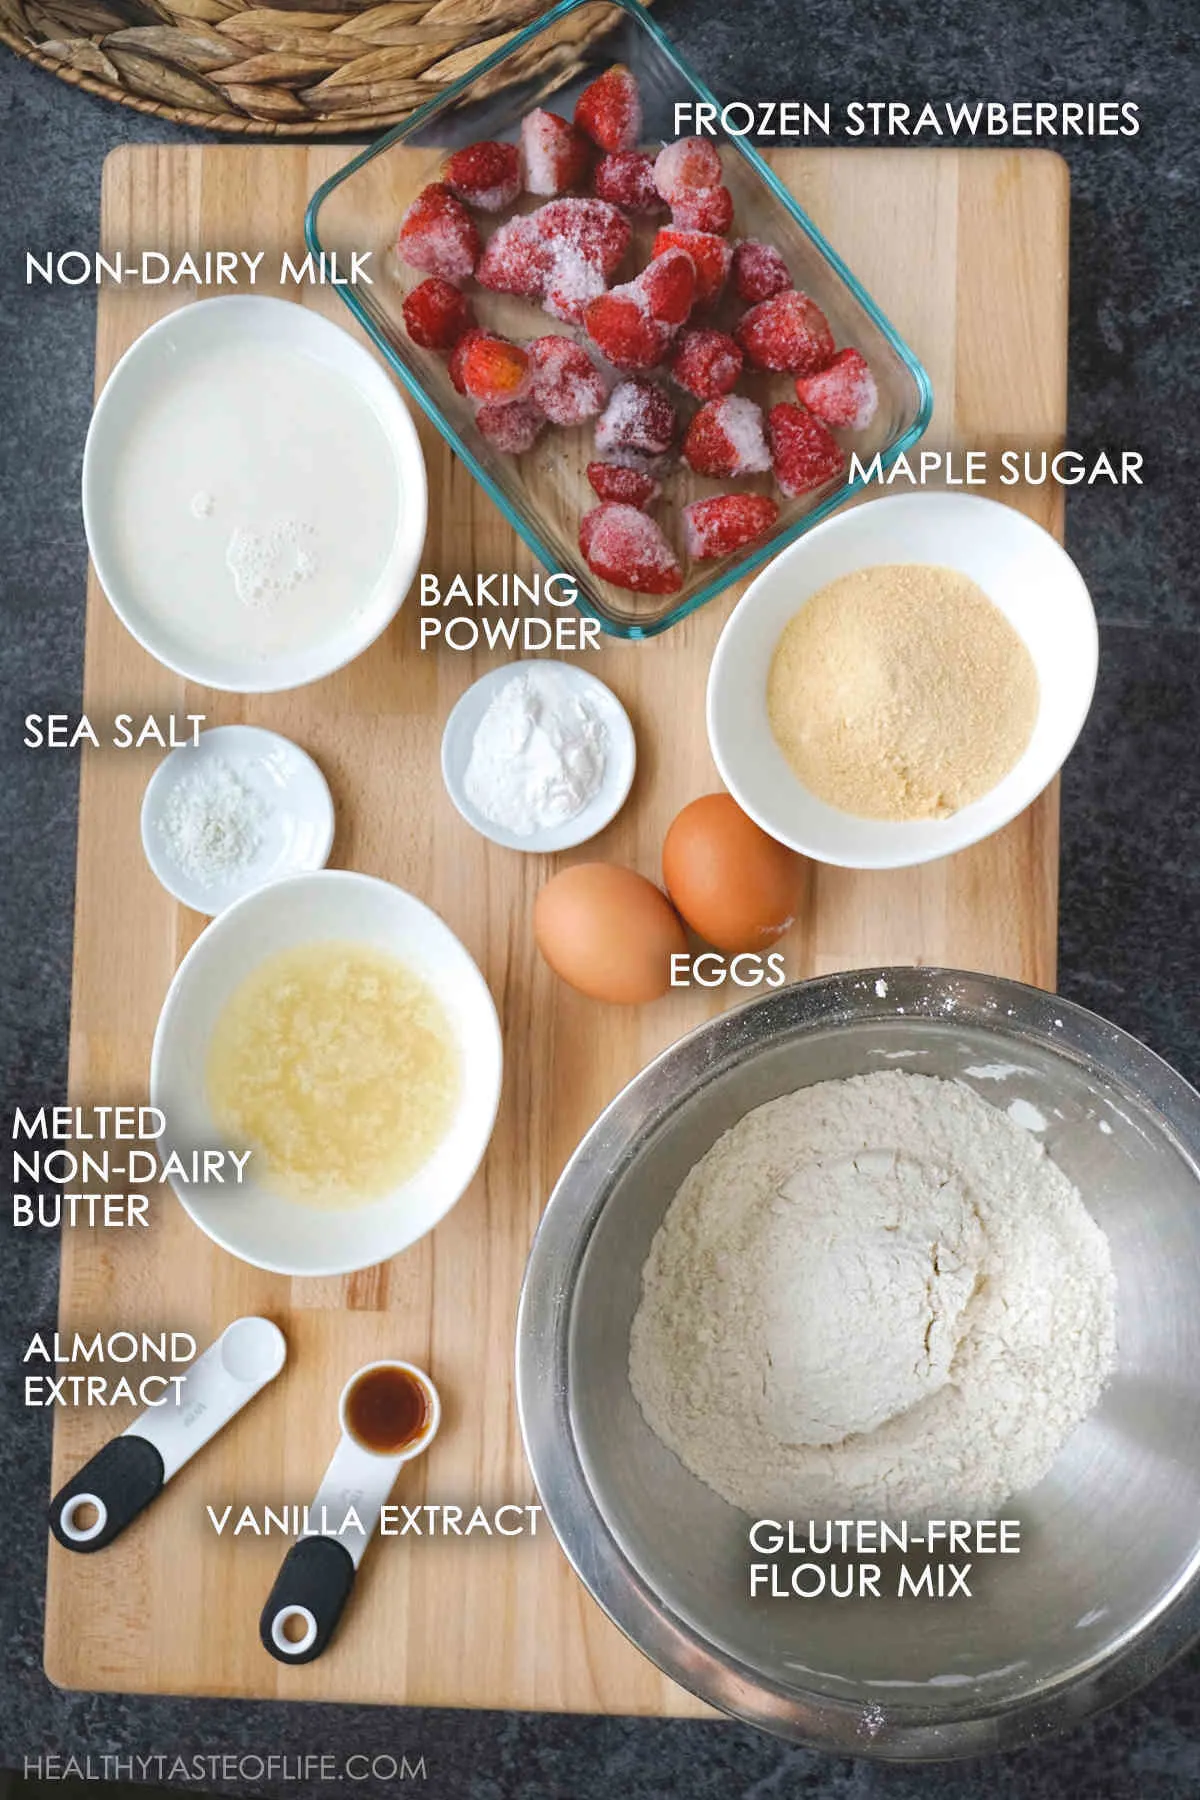 Ingredients for strawberry muffins displayed on a board.